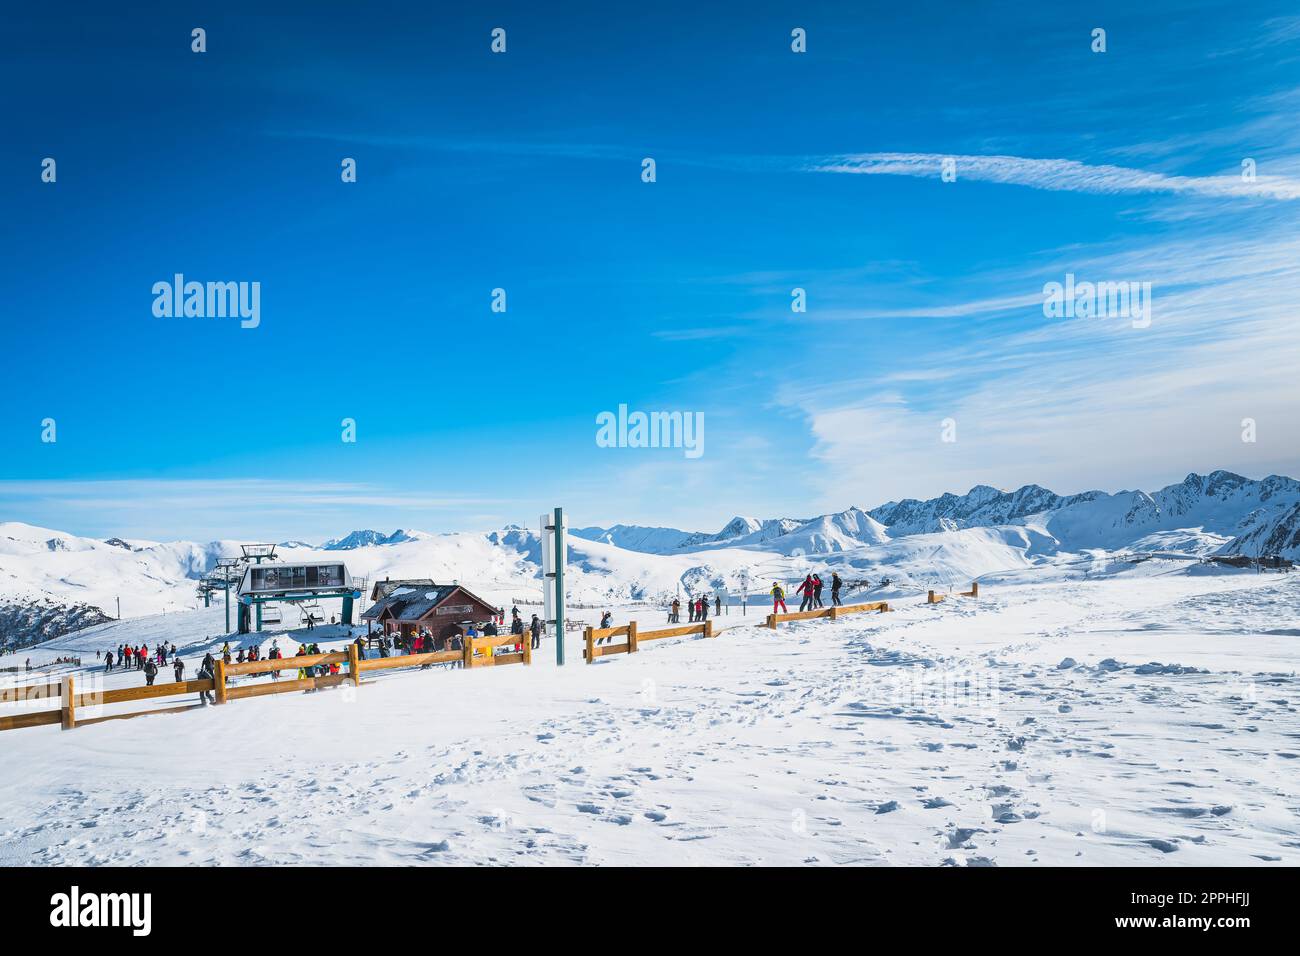 Skiers and snowboarders getting ready to get on a slopes near ski lift, Andorra Stock Photo